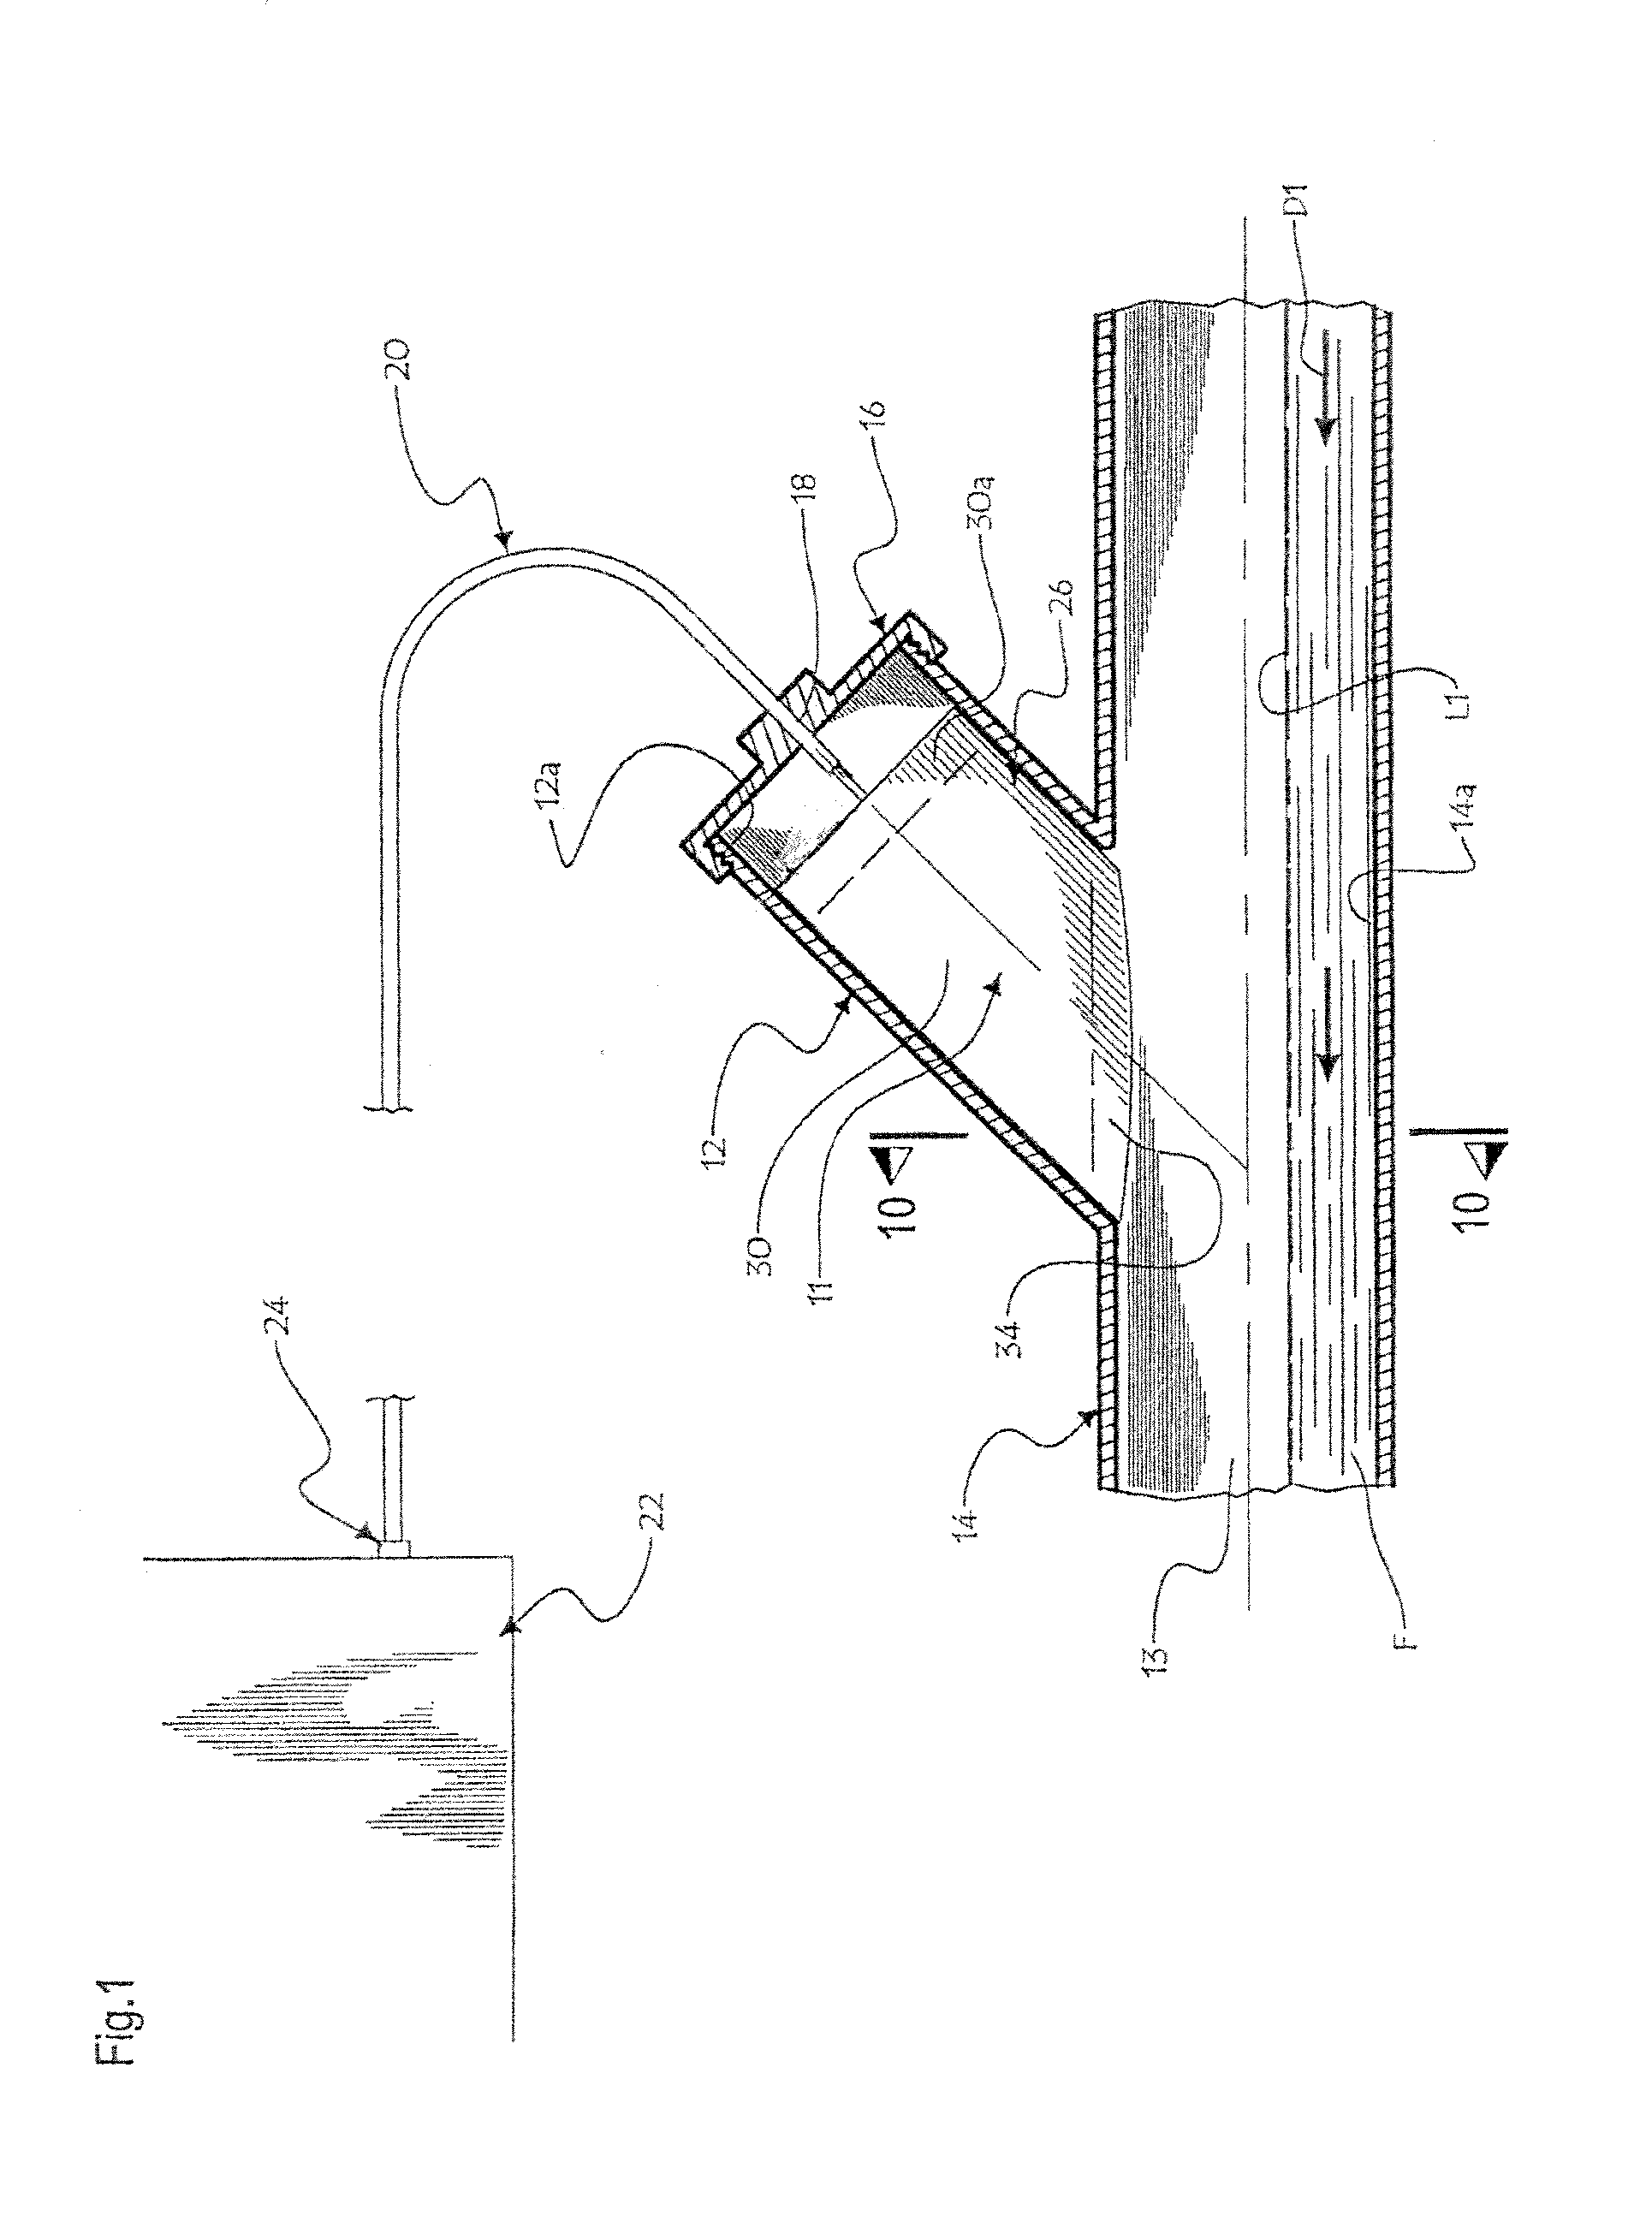 Fluid Backup Preventing System and Method of Use Thereof